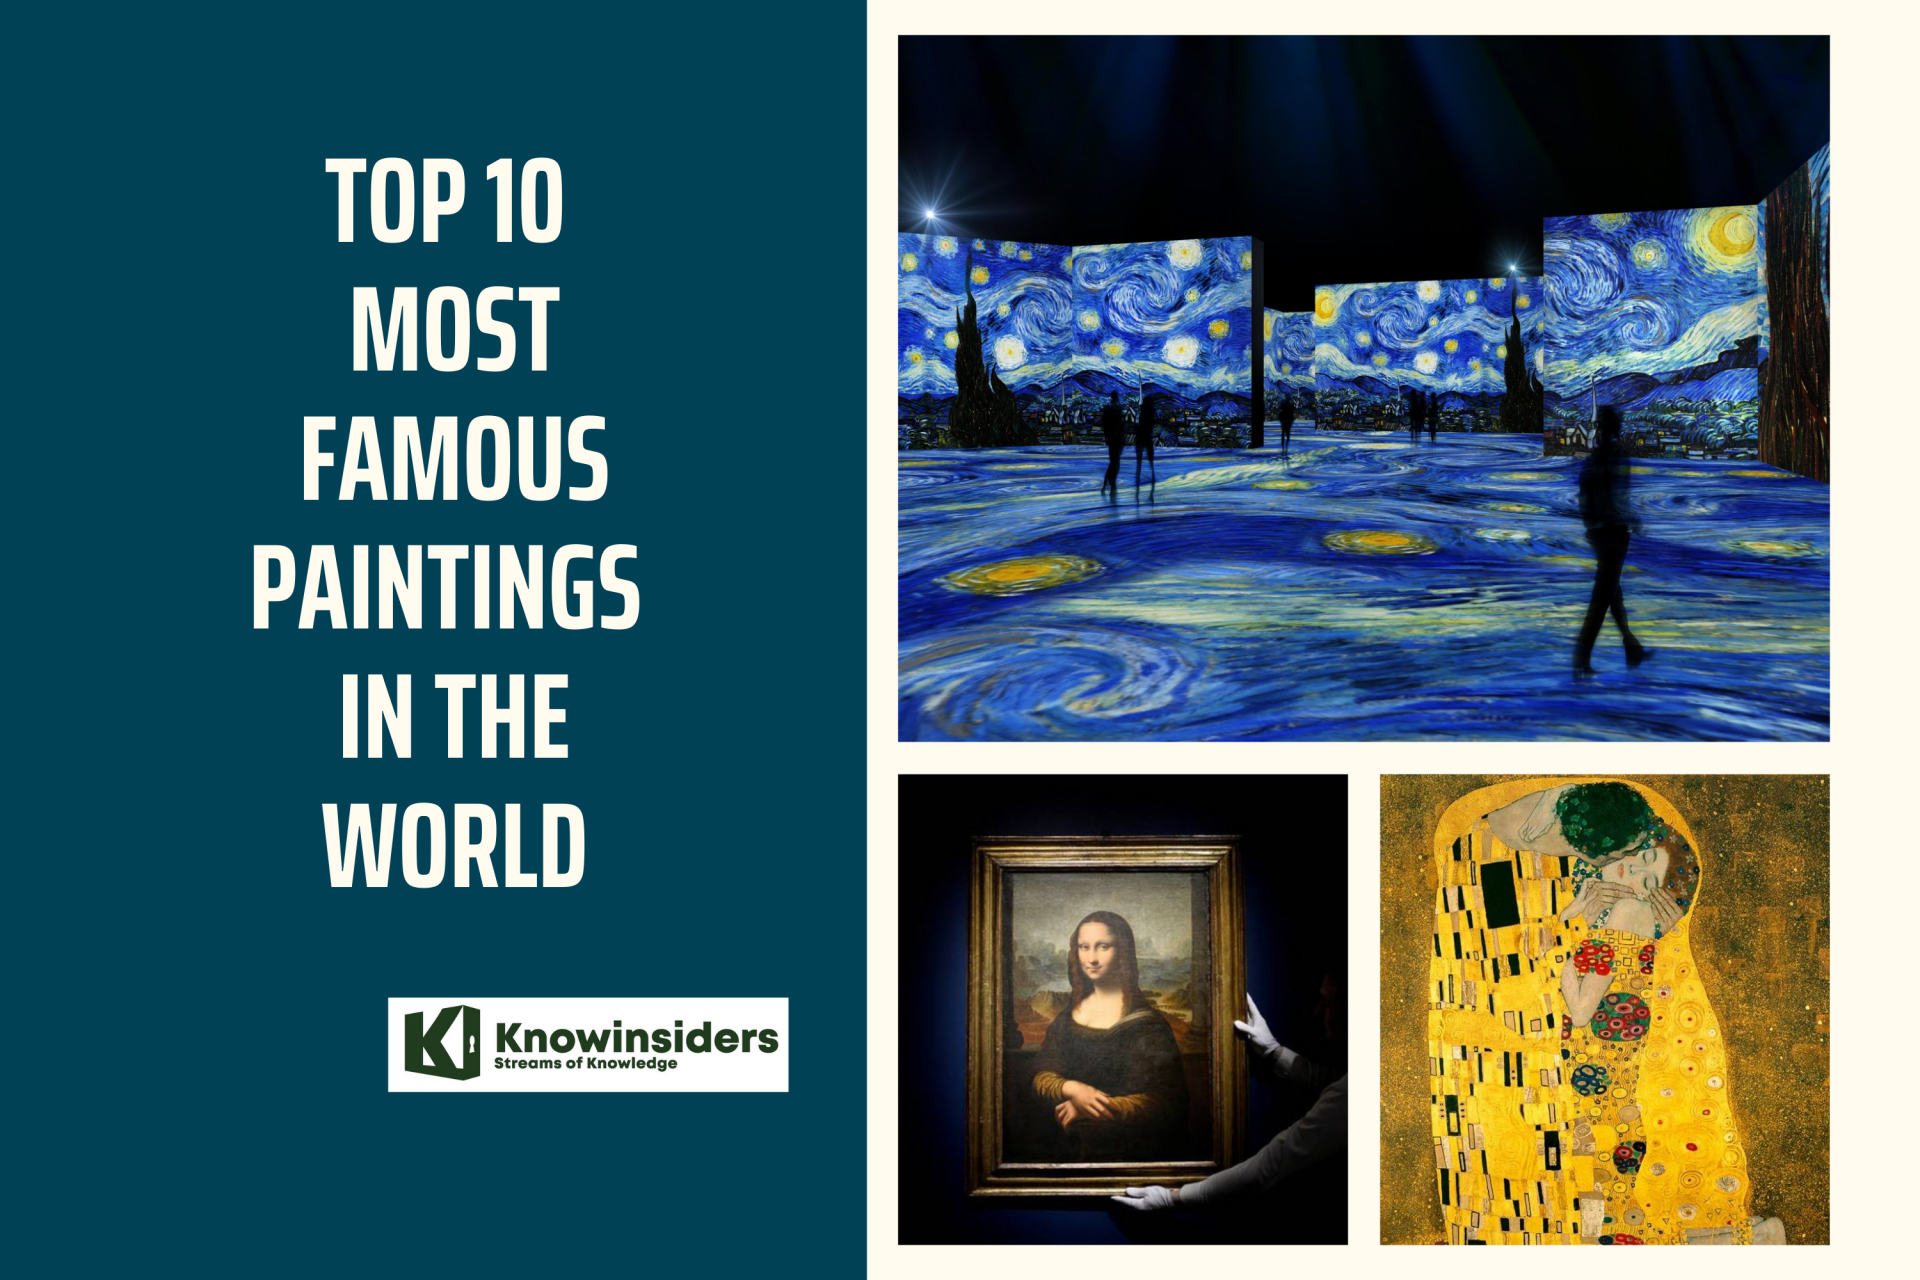 Top 10 Most Famous Paintings in the World